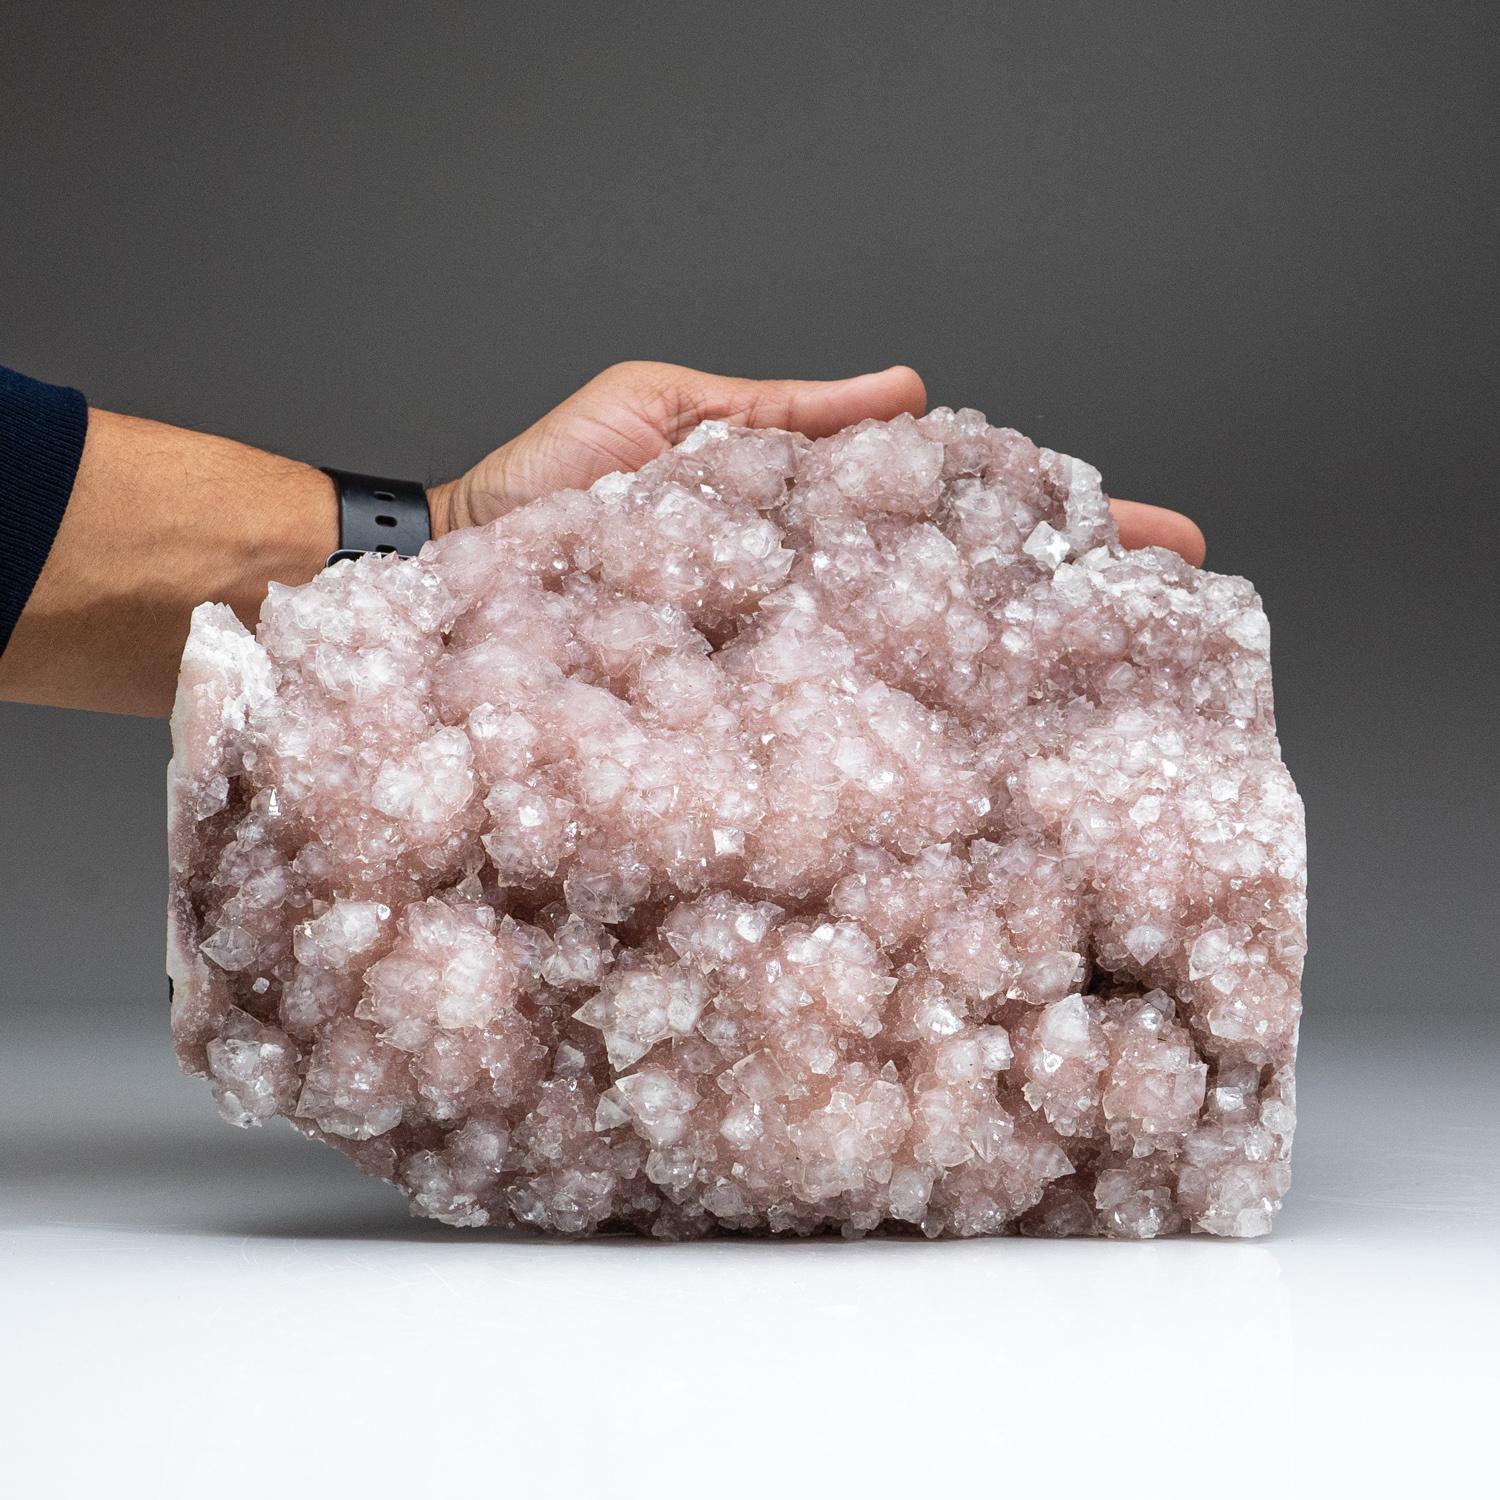 From Maharashtra, India 

Scintillating cluster of translucent crystalline micro crystals of pink apophyllite. Has gradient color from deep pink to light pink with lustrous crystal faces.

 

9.4 lbs, 9.5 x 3 x 8 inches